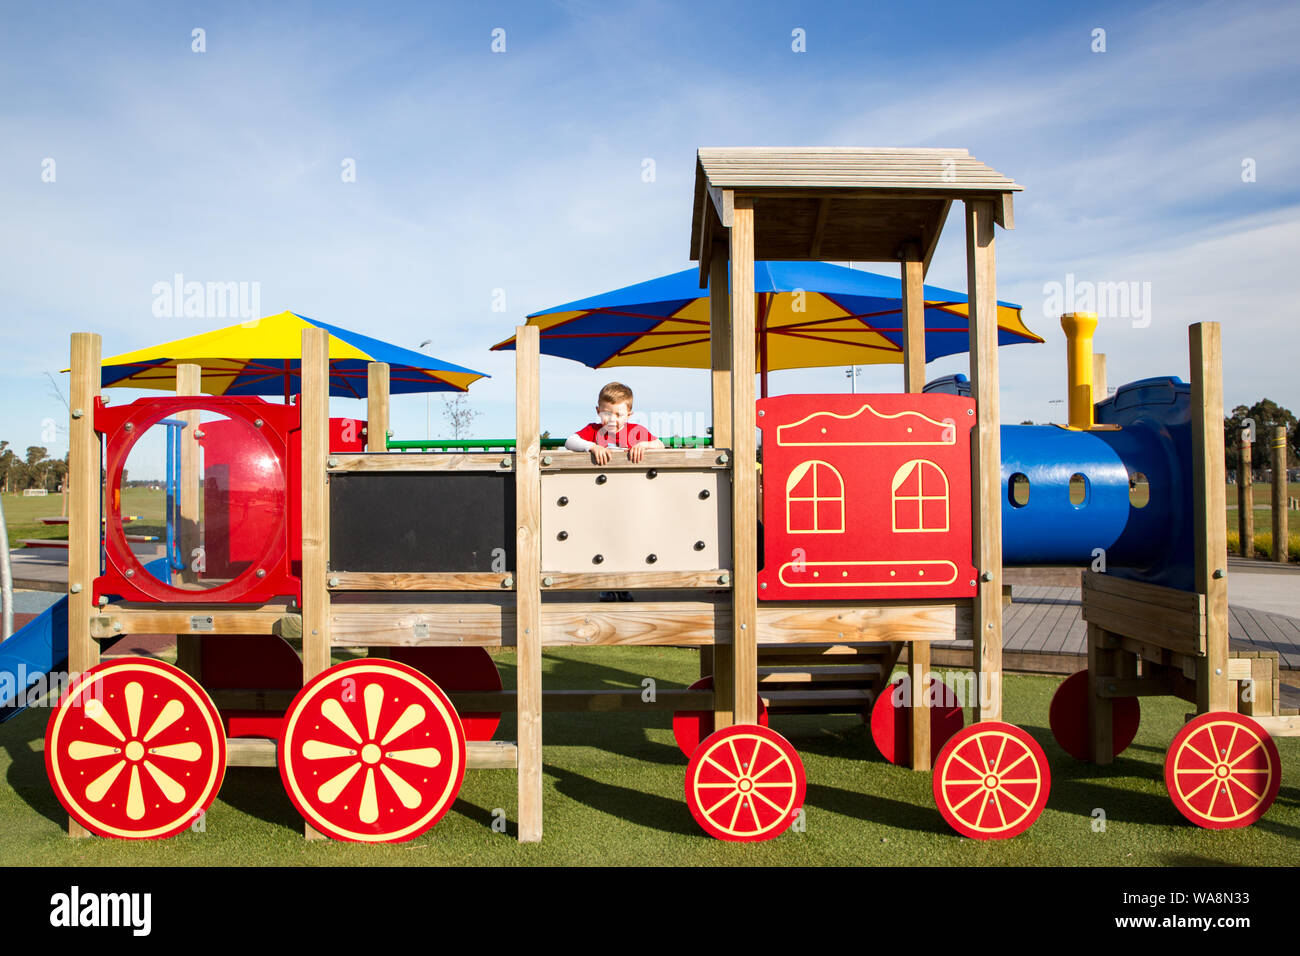 A young preschool child climbs up on the colorful wooden activity train at a public playground in New Zealand Stock Photo